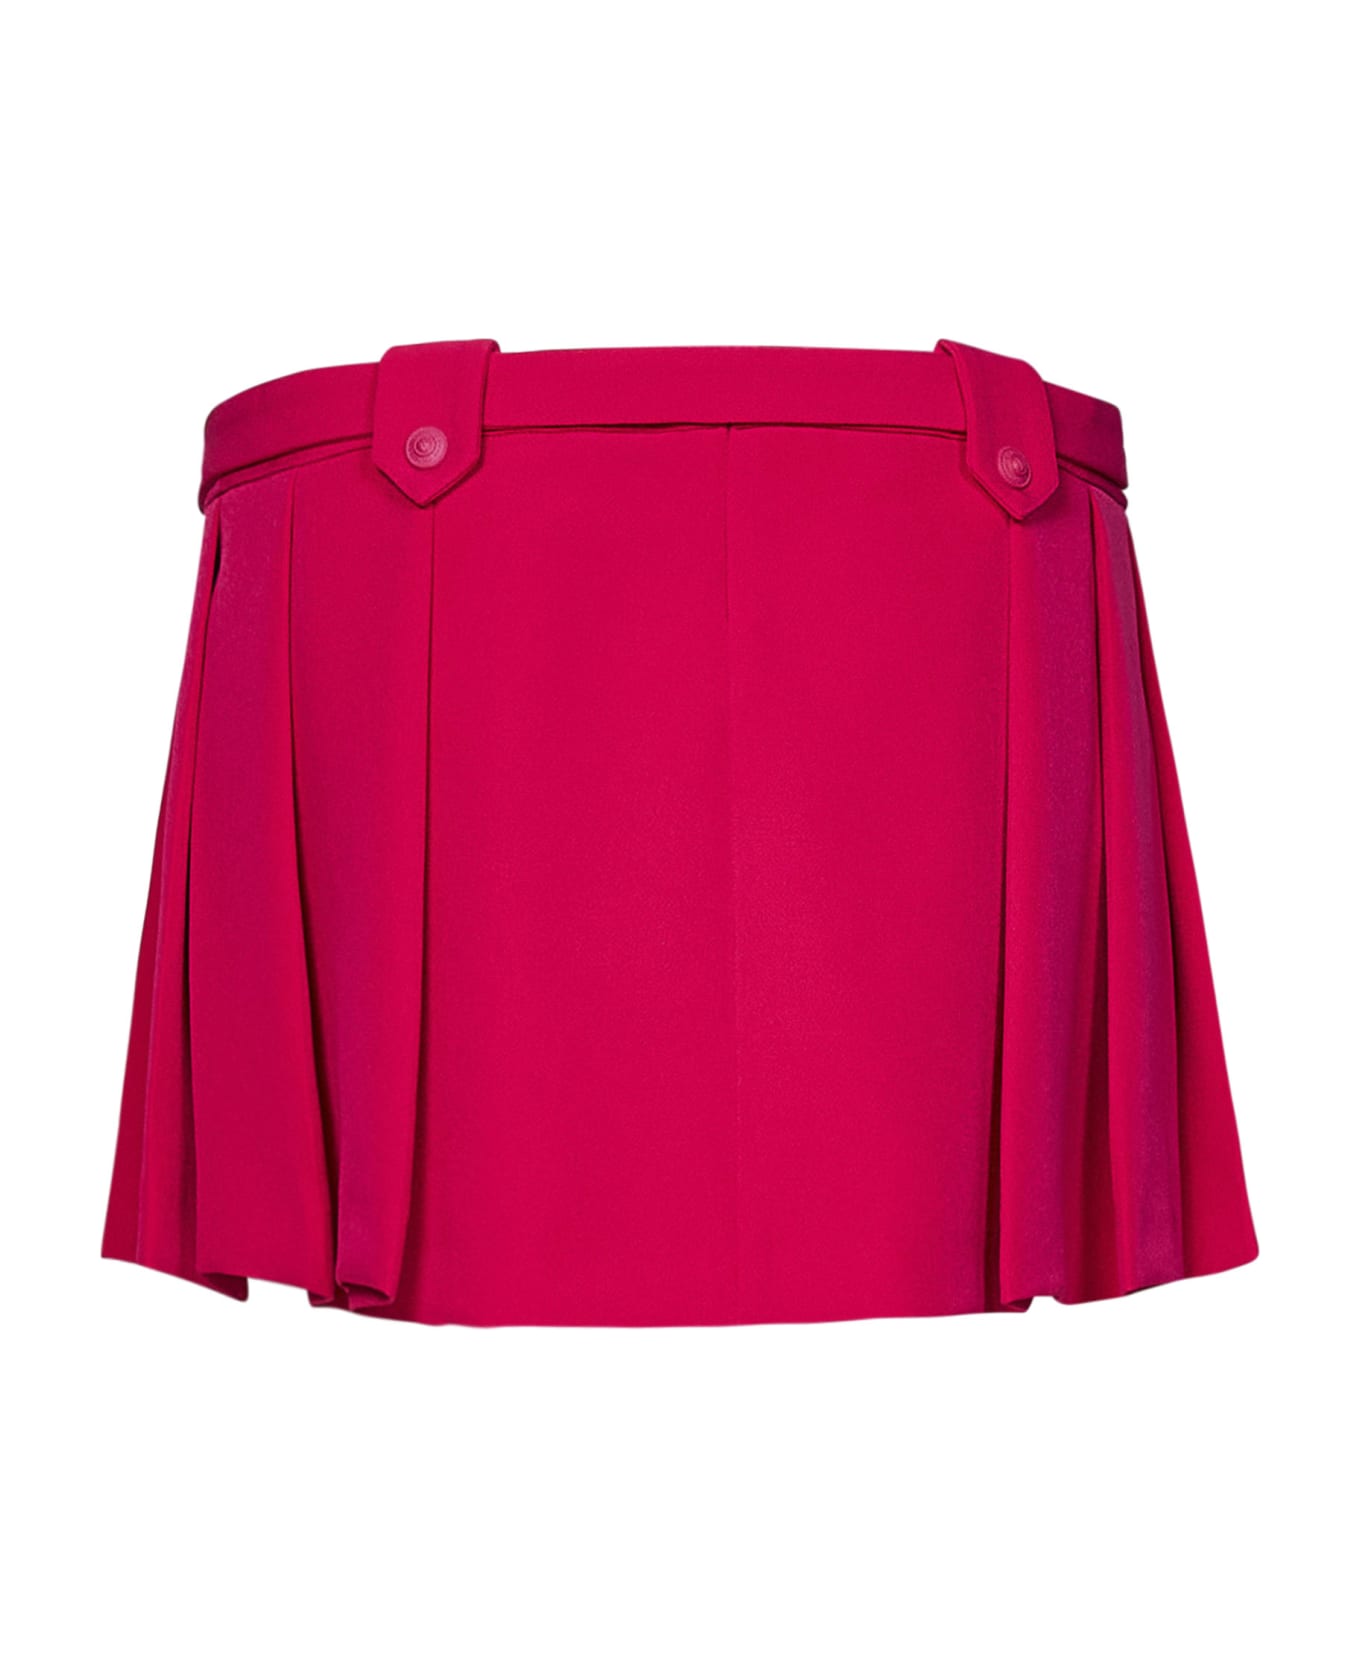 Versace Jeans Couture Skirt - Hot Pink スカート